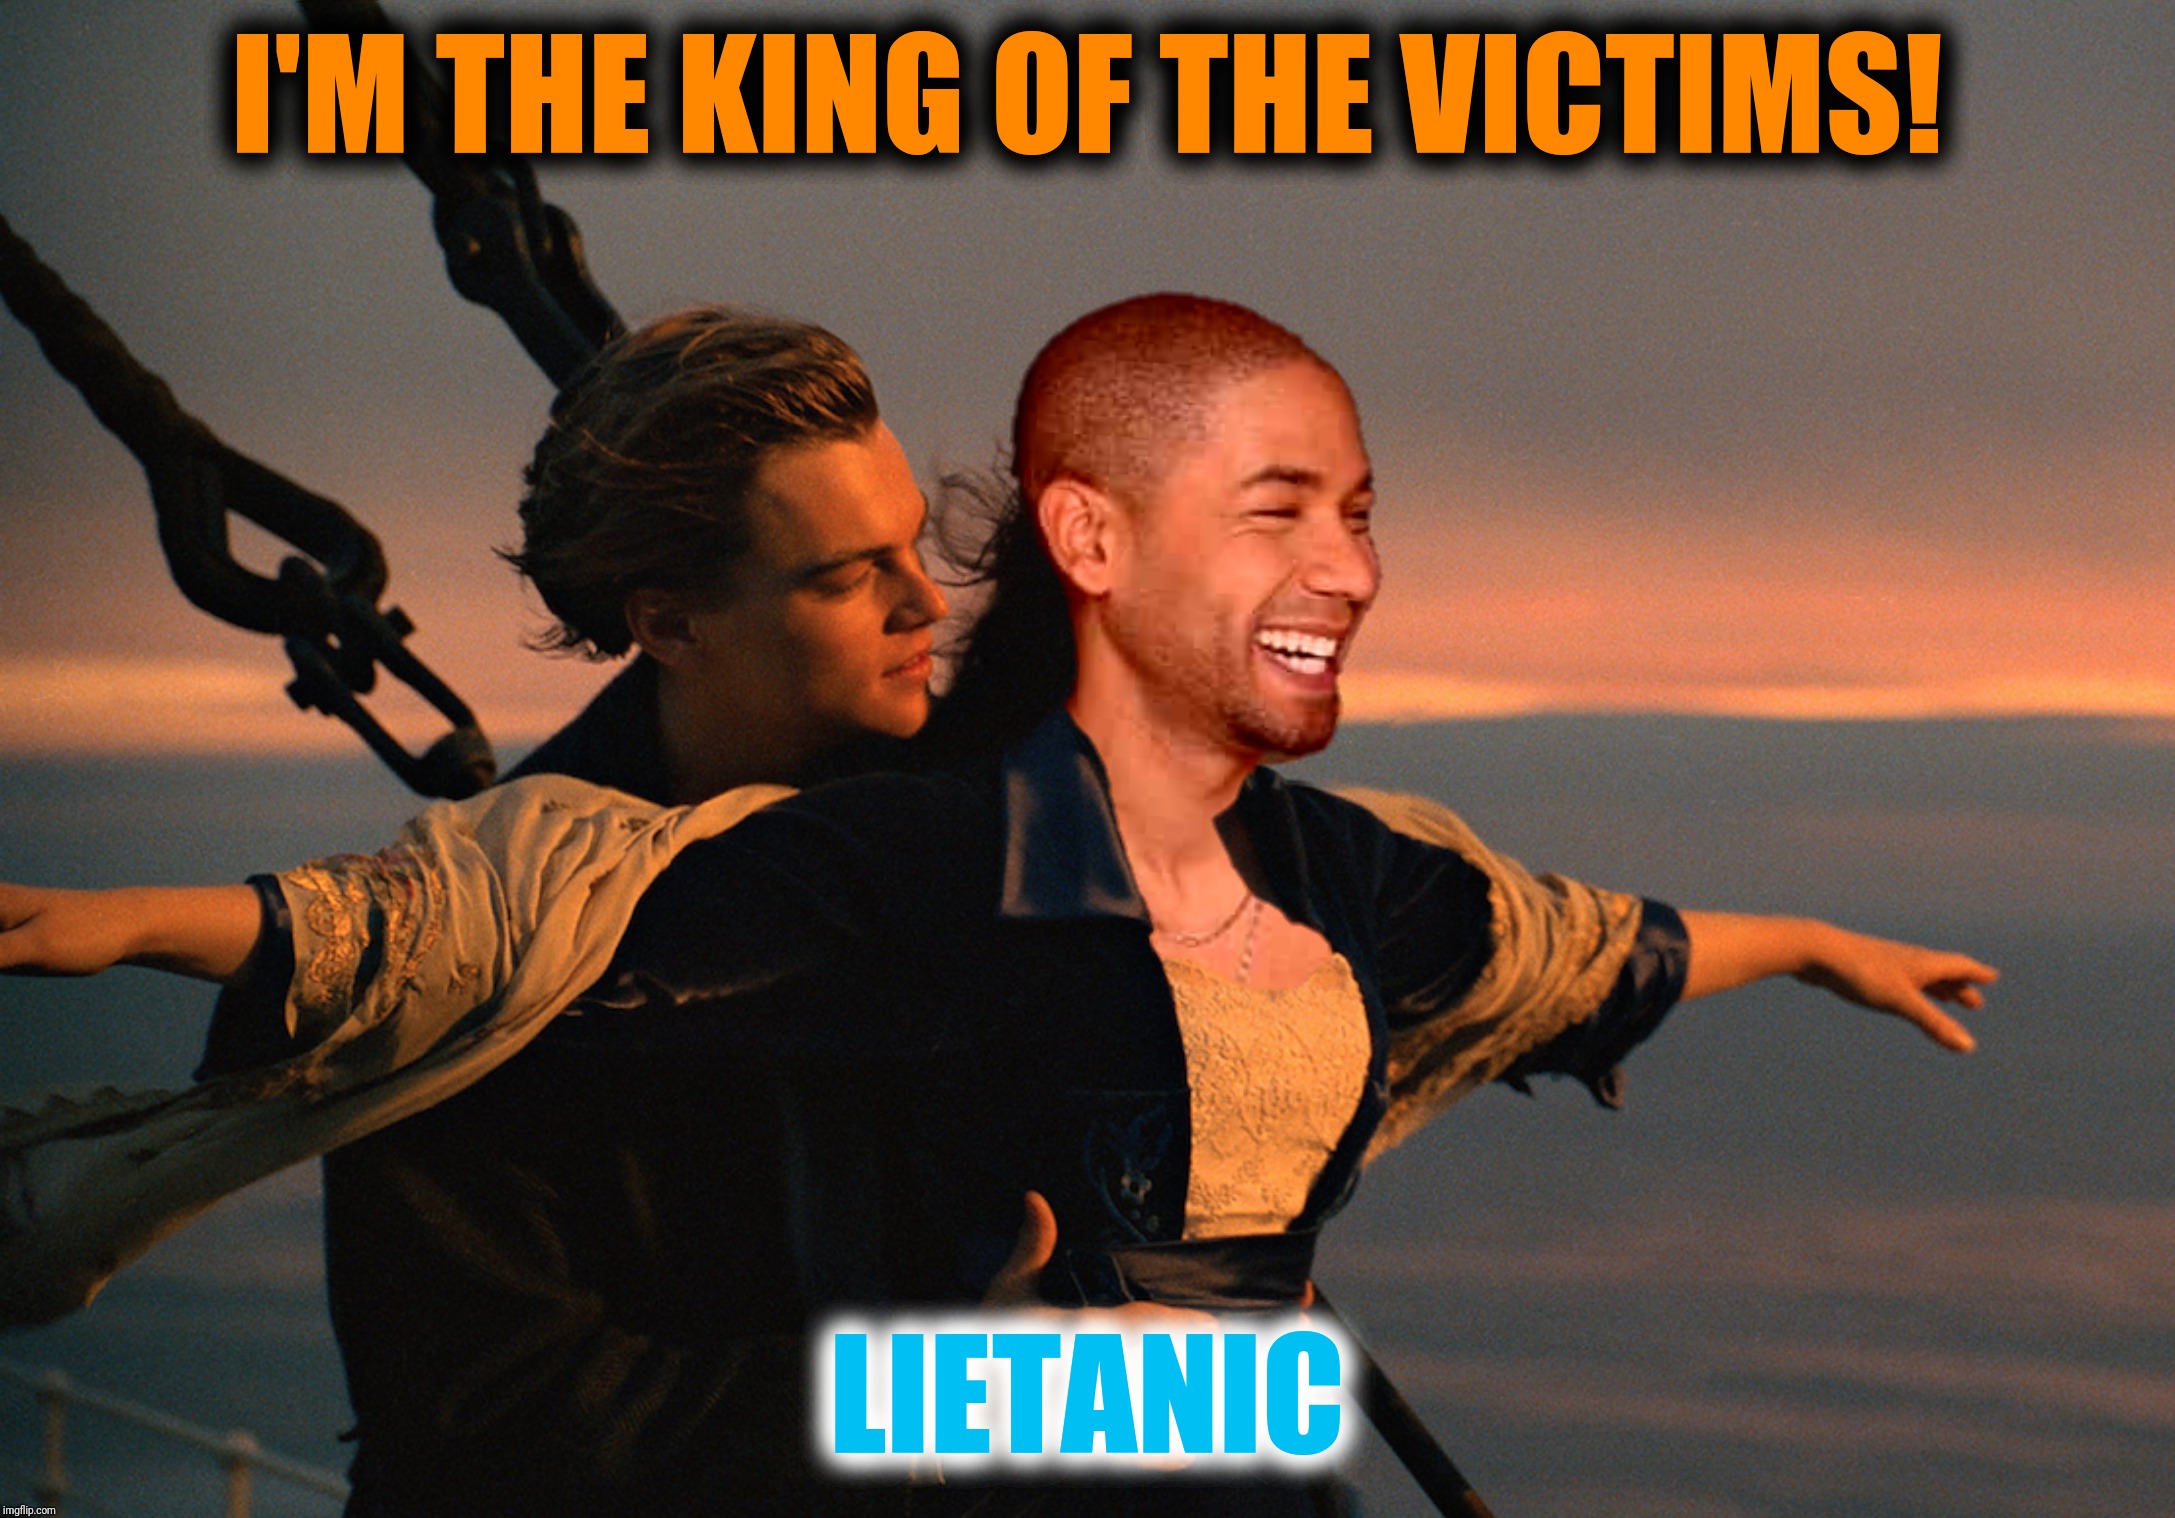 Bad Photoshop Academy Awards Sunday presents:  The face you make when your career hits an iceberg | I'M THE KING OF THE VICTIMS! LIETANIC | image tagged in bad photoshop sunday,titanic,jussie smollett,victim | made w/ Imgflip meme maker